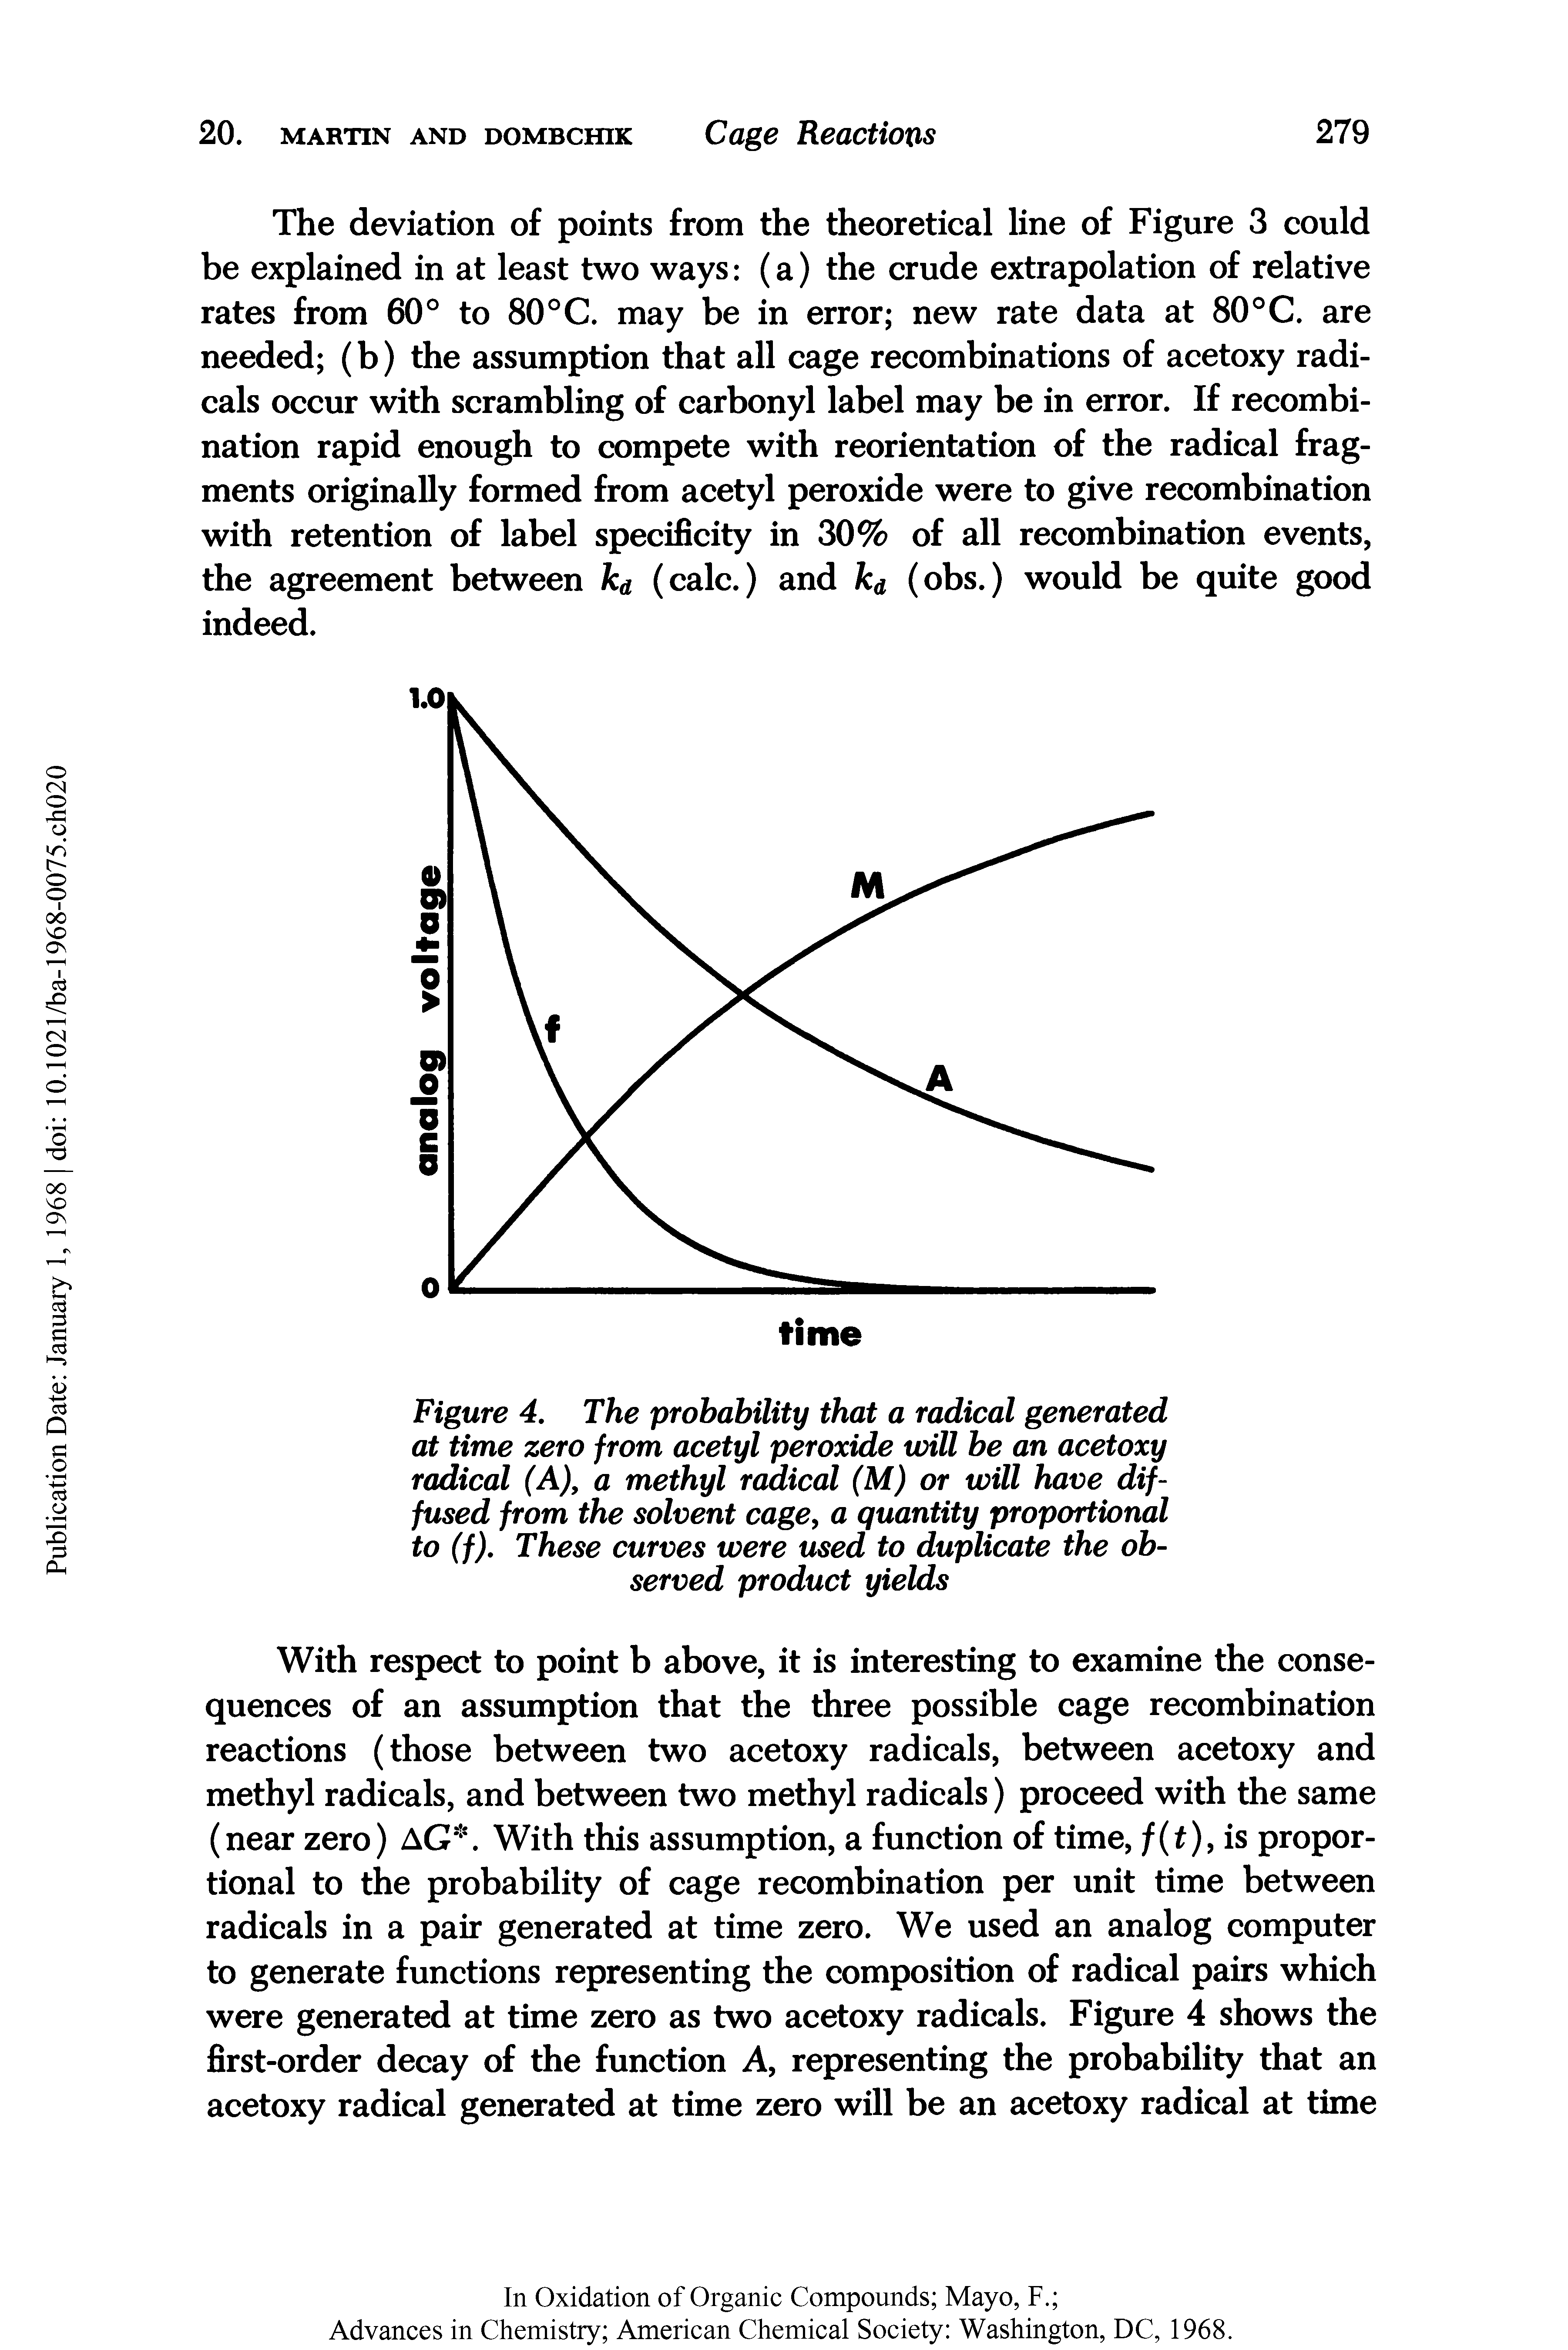 Figure 4. The prohahility that a radical generated at time zero from acetyl peroxide will be an acetoxy radical (A), a methyl radical (M) or will have diffused from the solvent cage, a quantity proportional to (f). These curves were used to duplicate the observed product yields...